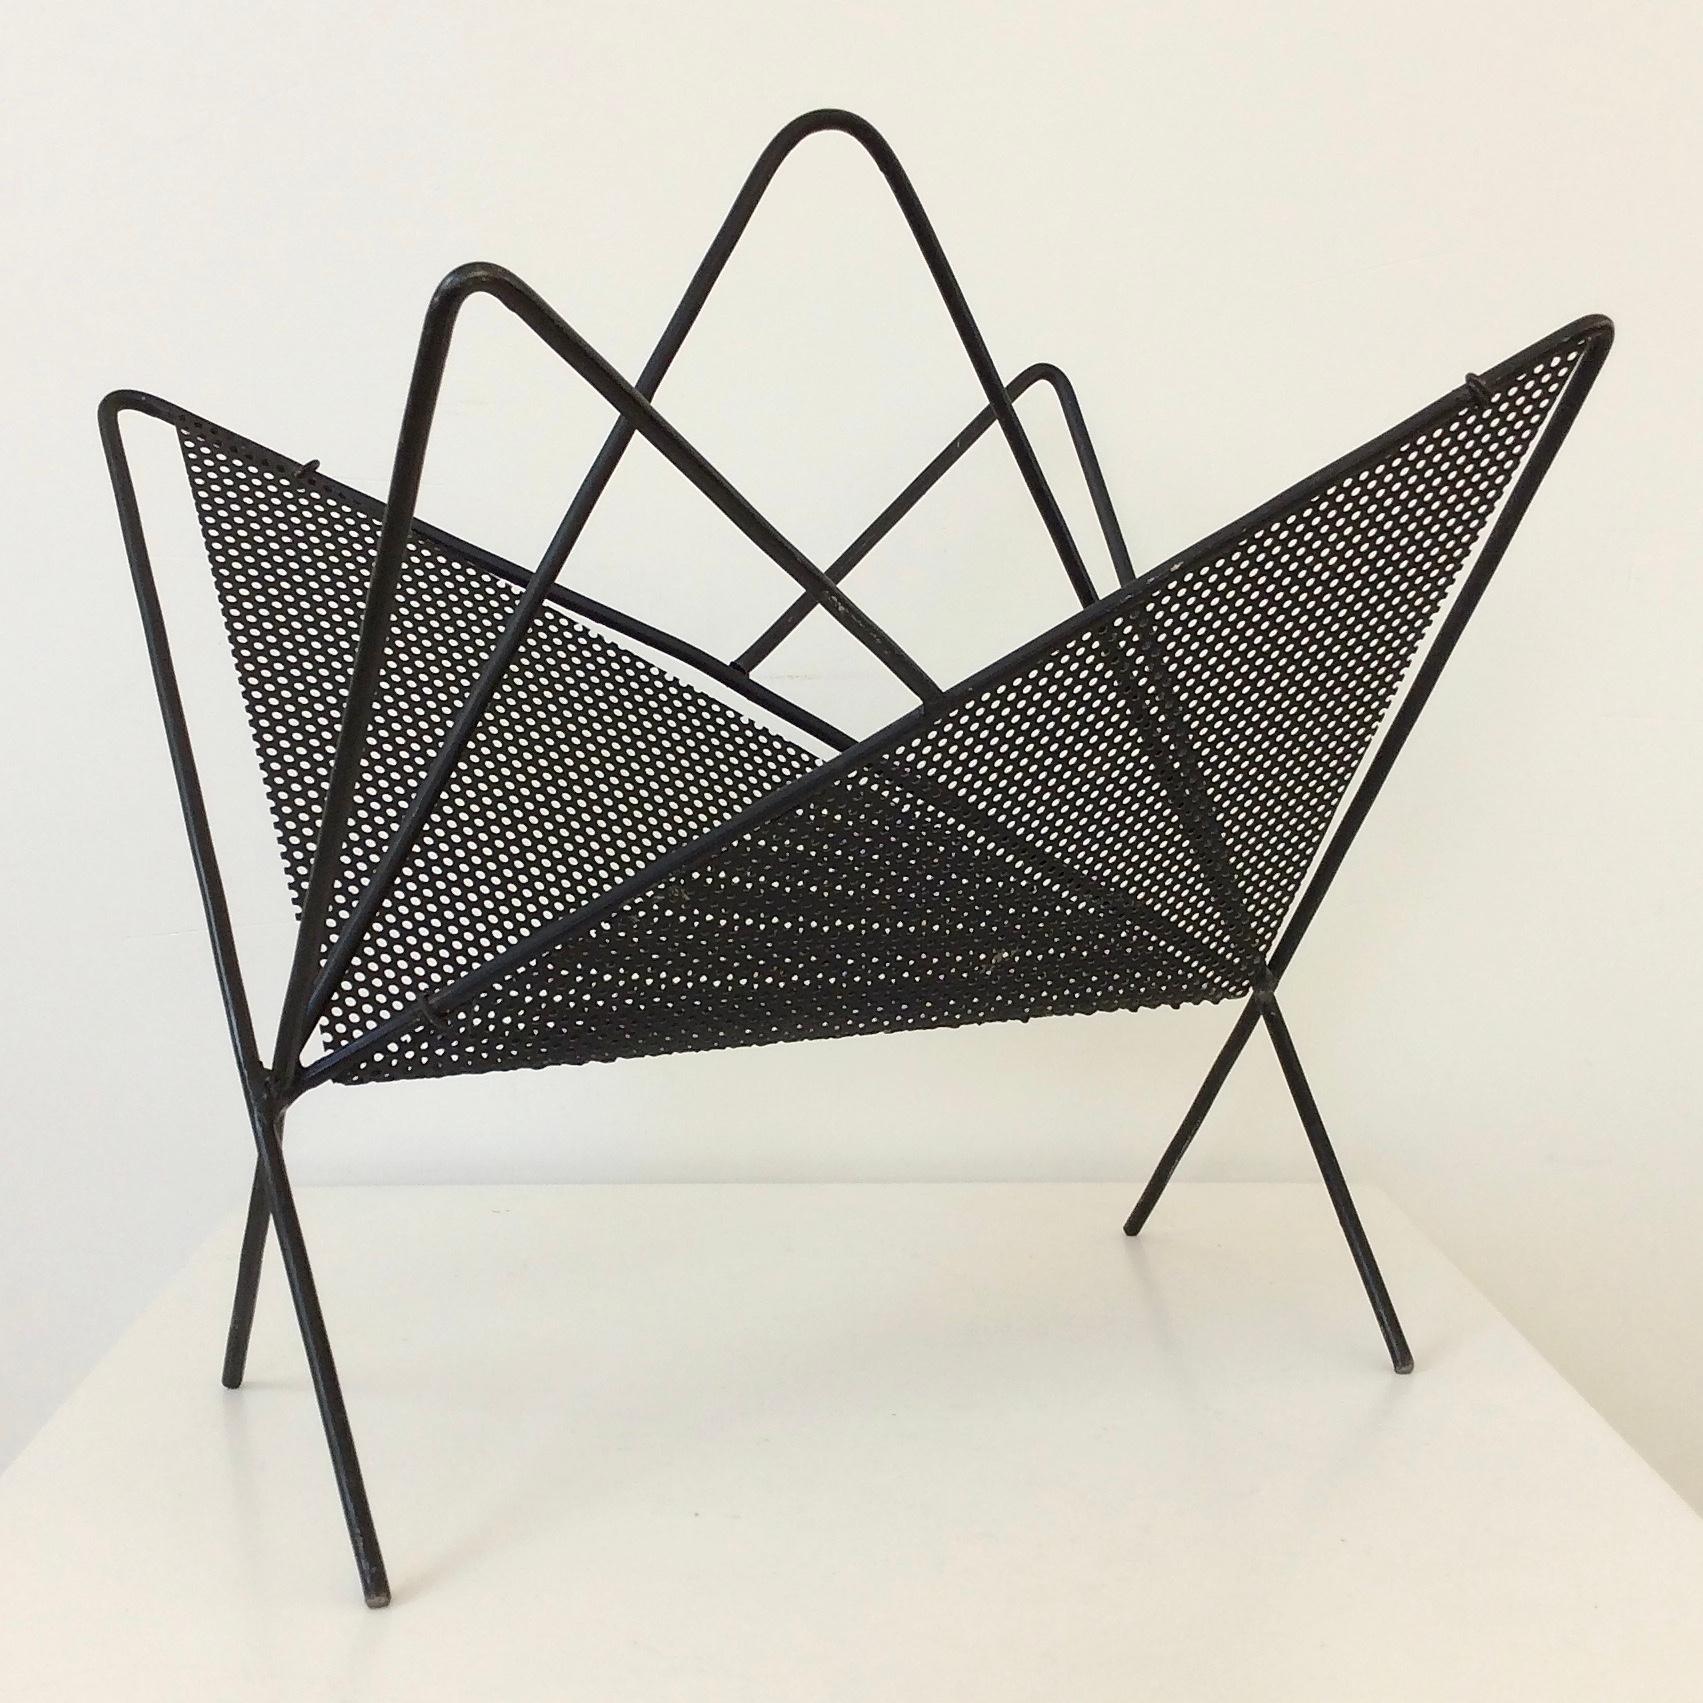 Mathieu Mategot magazine holder, Butterfly model, circa 1950, France.
Manufactured by Les Ateliers Matégot.
Black lacquered folded and perforated metal.
Dimensions: 36 cm W, 38 cm H, 30 cm D.`
Original condition.
All purchases are covered by